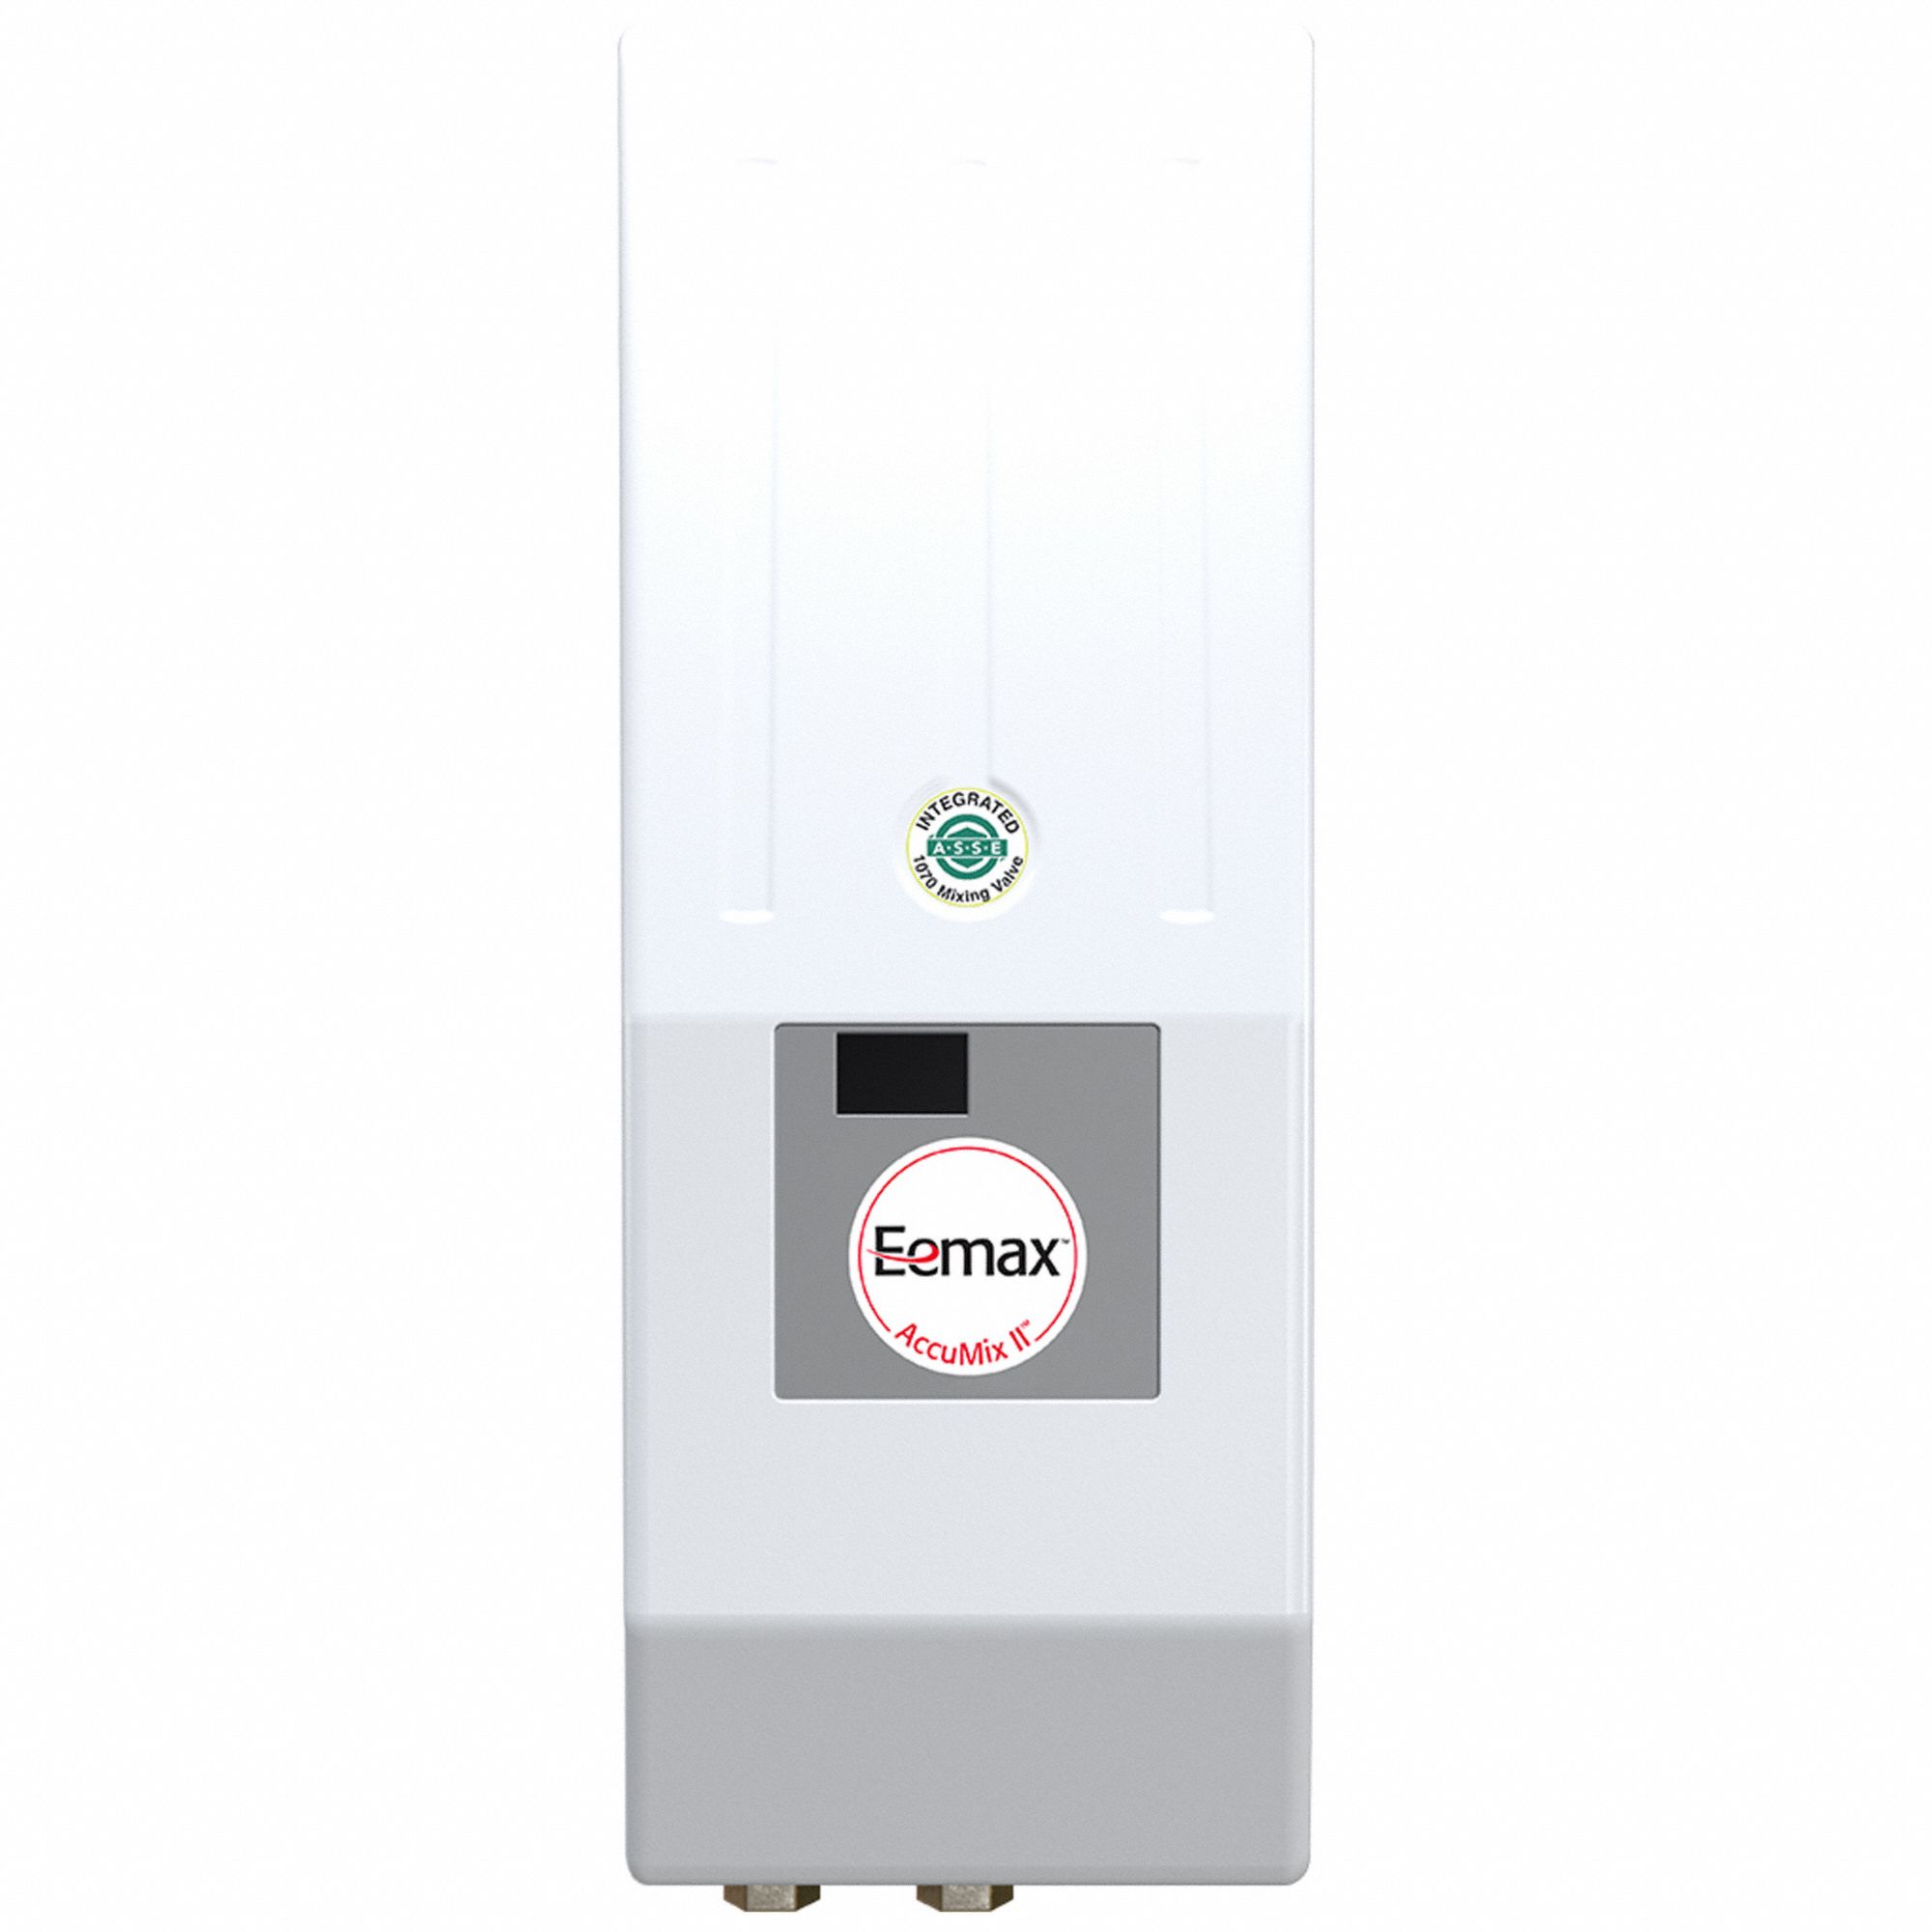 EEMAX AM010277T Electric Tankless Water Heater277V